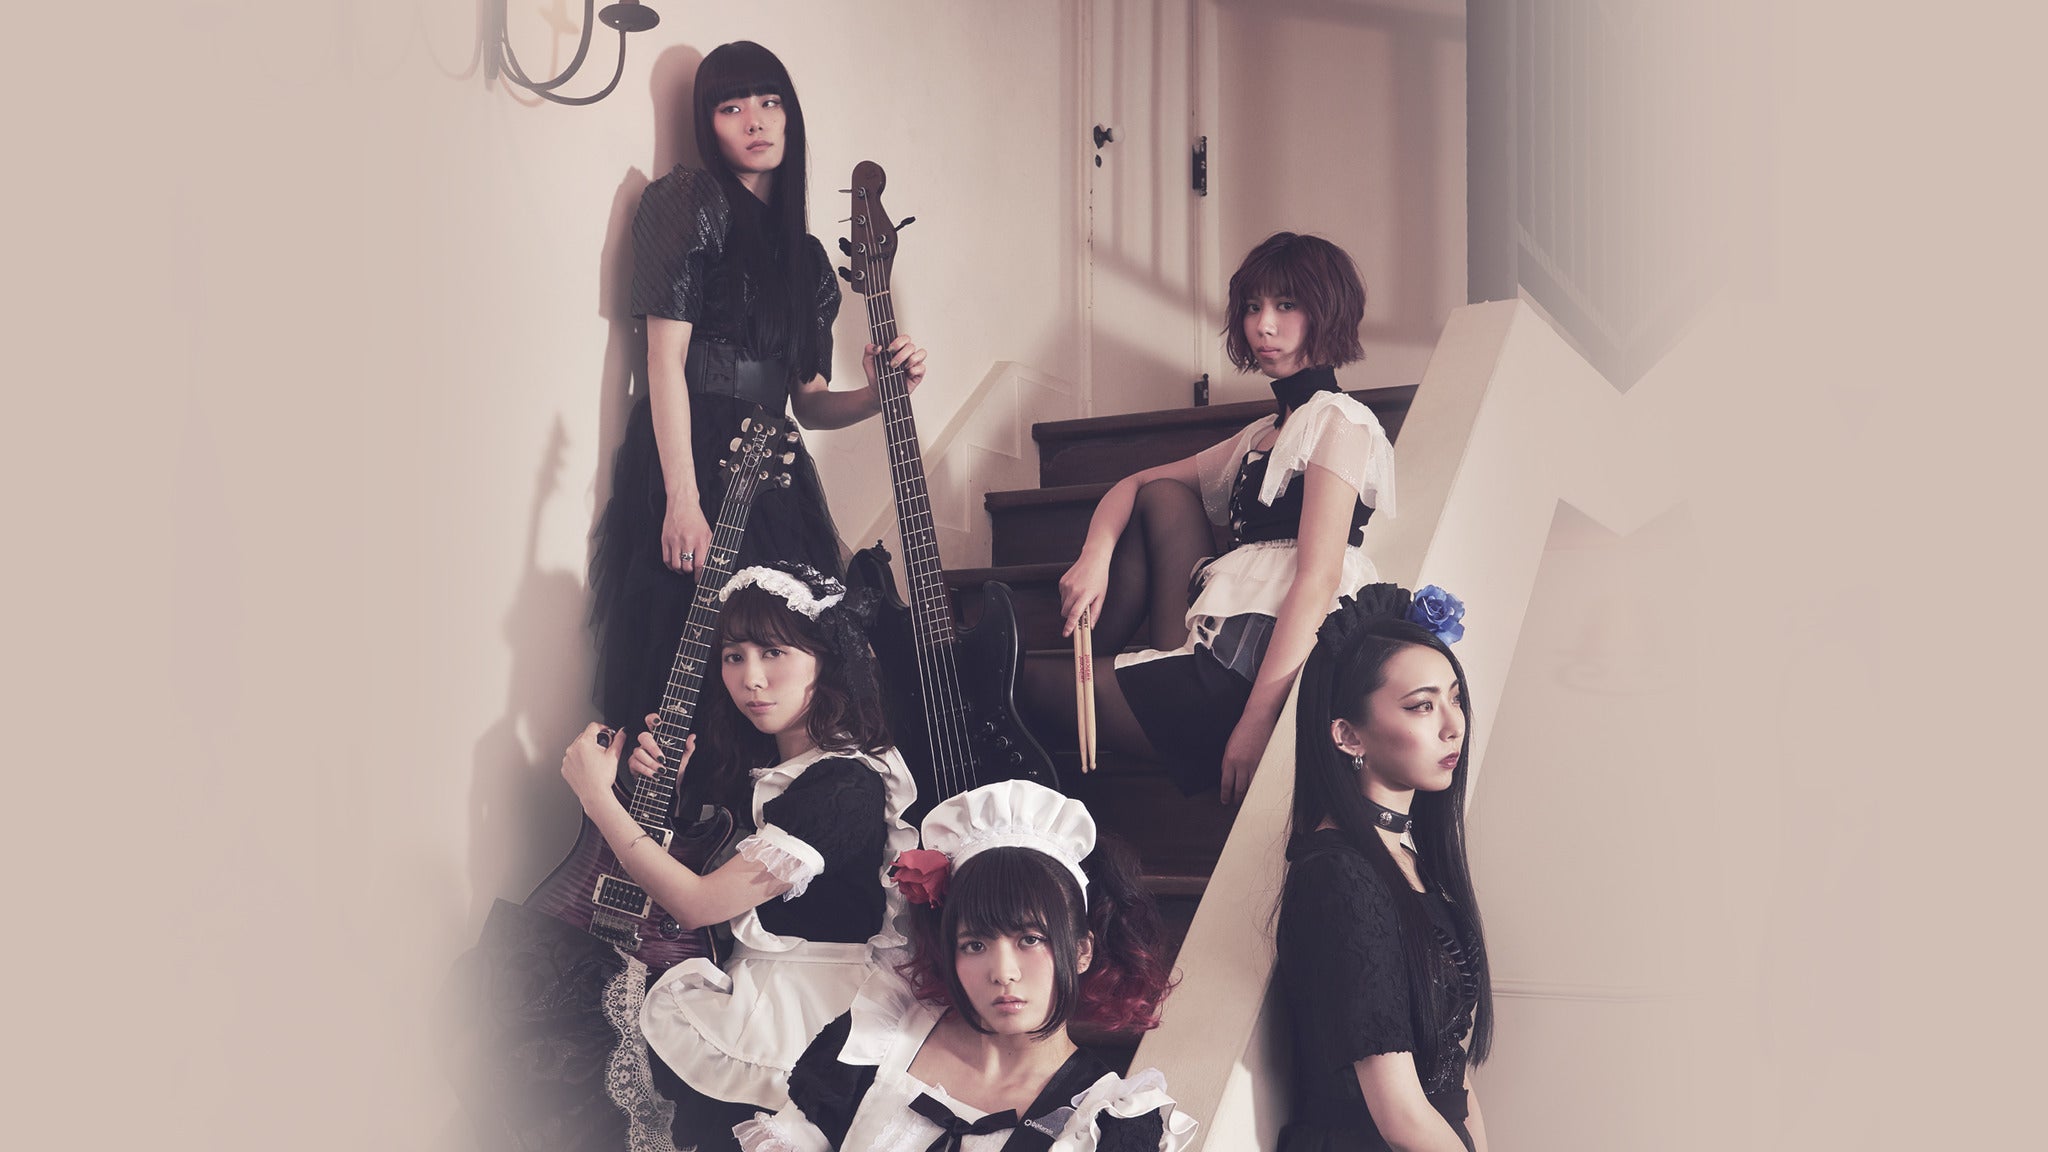 BAND-MAID WORLD DOMINATION TOUR 2019 ~gekidou~ in Dallas promo photo for VIP Package presale offer code